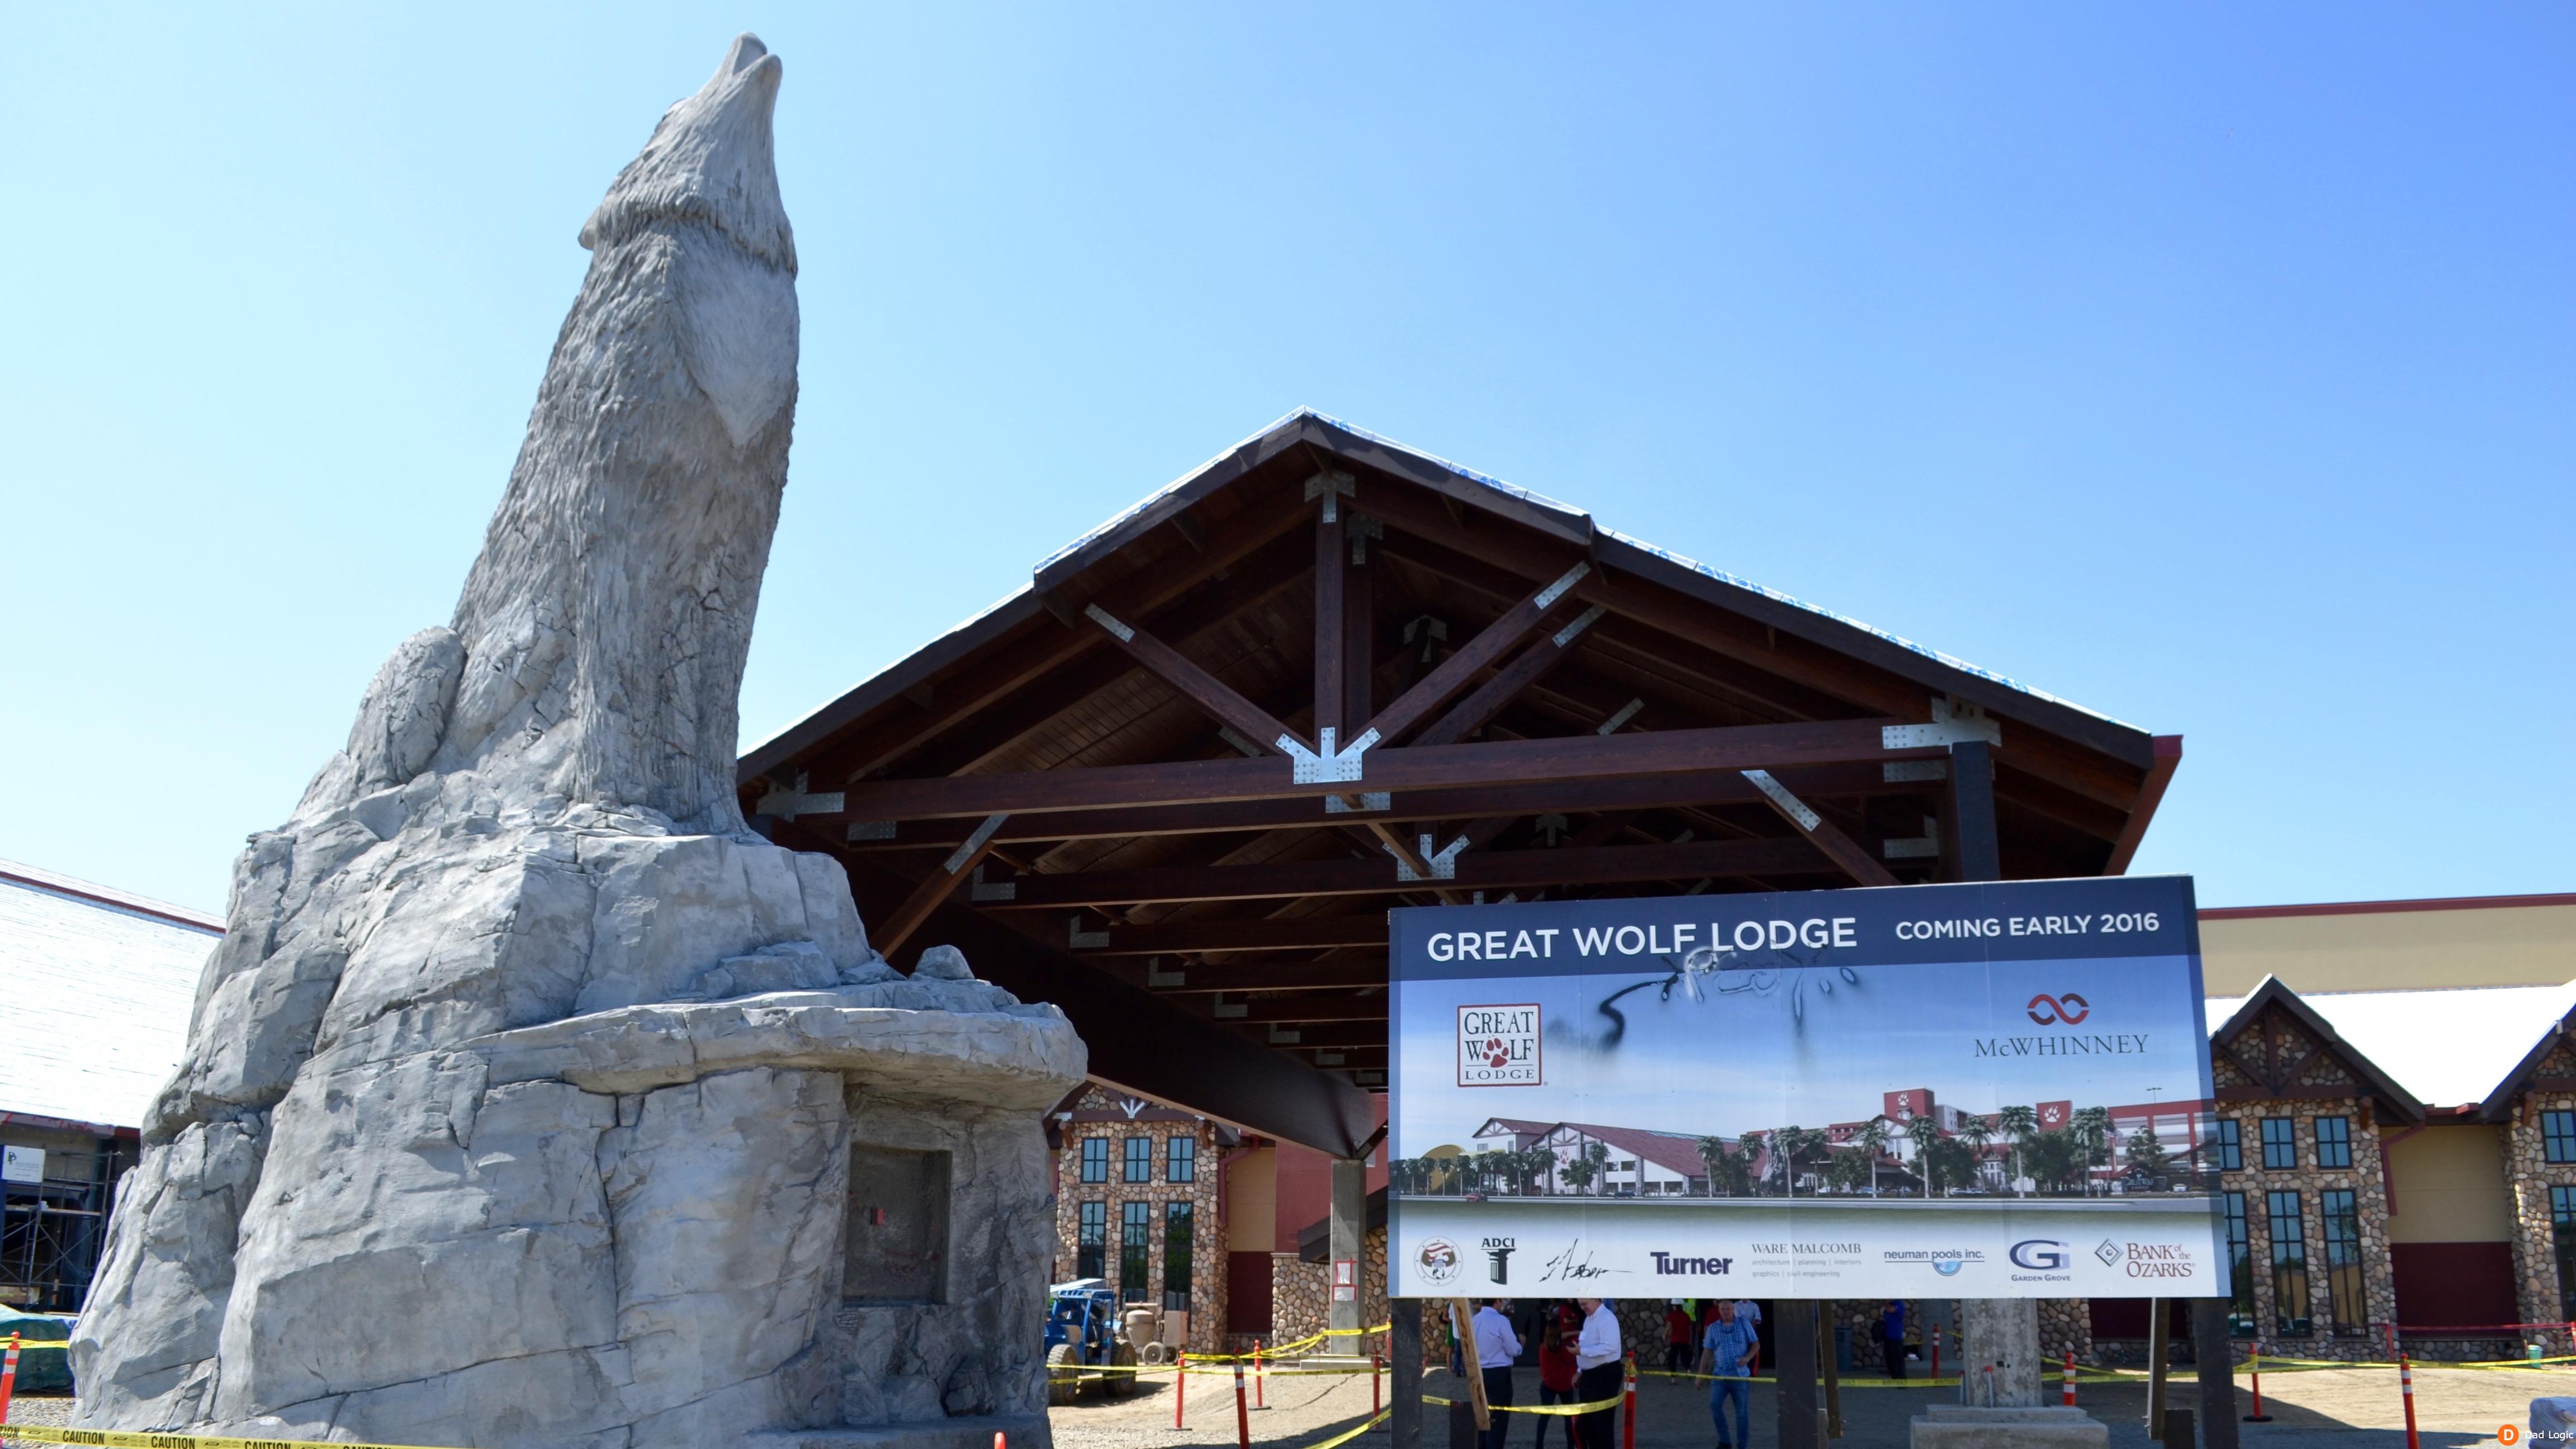 Great Wolf Lodge Southern California Opens in March 2016 (Construction Photos) - Dad Logic